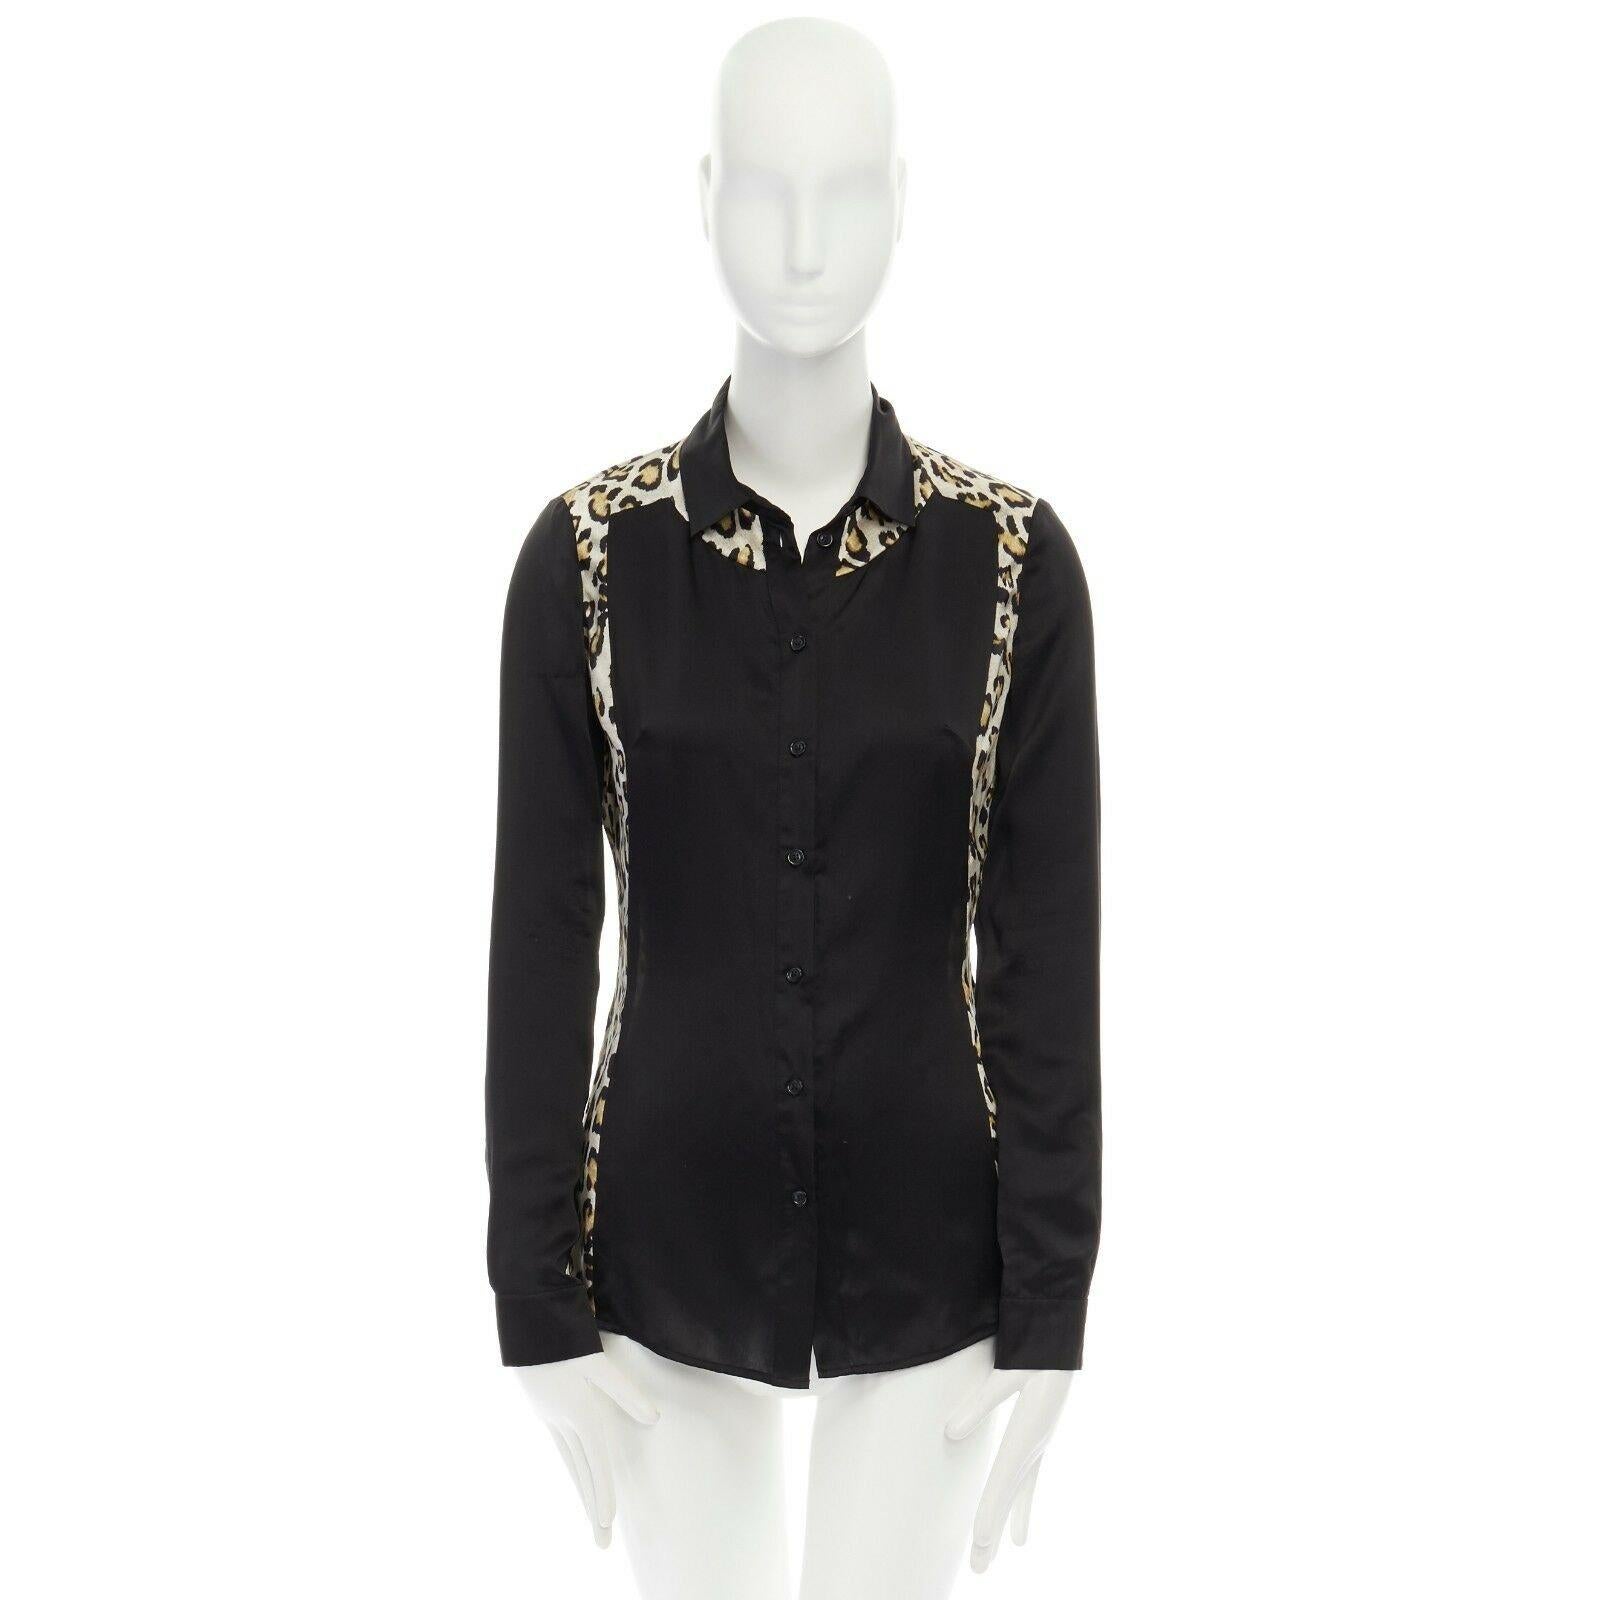 JUST CAVALLI 100% silk black leopard colorblocked button front shirt IT40 S 
Reference: MYSD/A00037 
Brand: Just Cavalli 
Designer: Roberto Cavalli 
Material: Silk 
Color: Black 
Pattern: Other 
Closure: Button 
Extra Detail: 100% silk. Black with